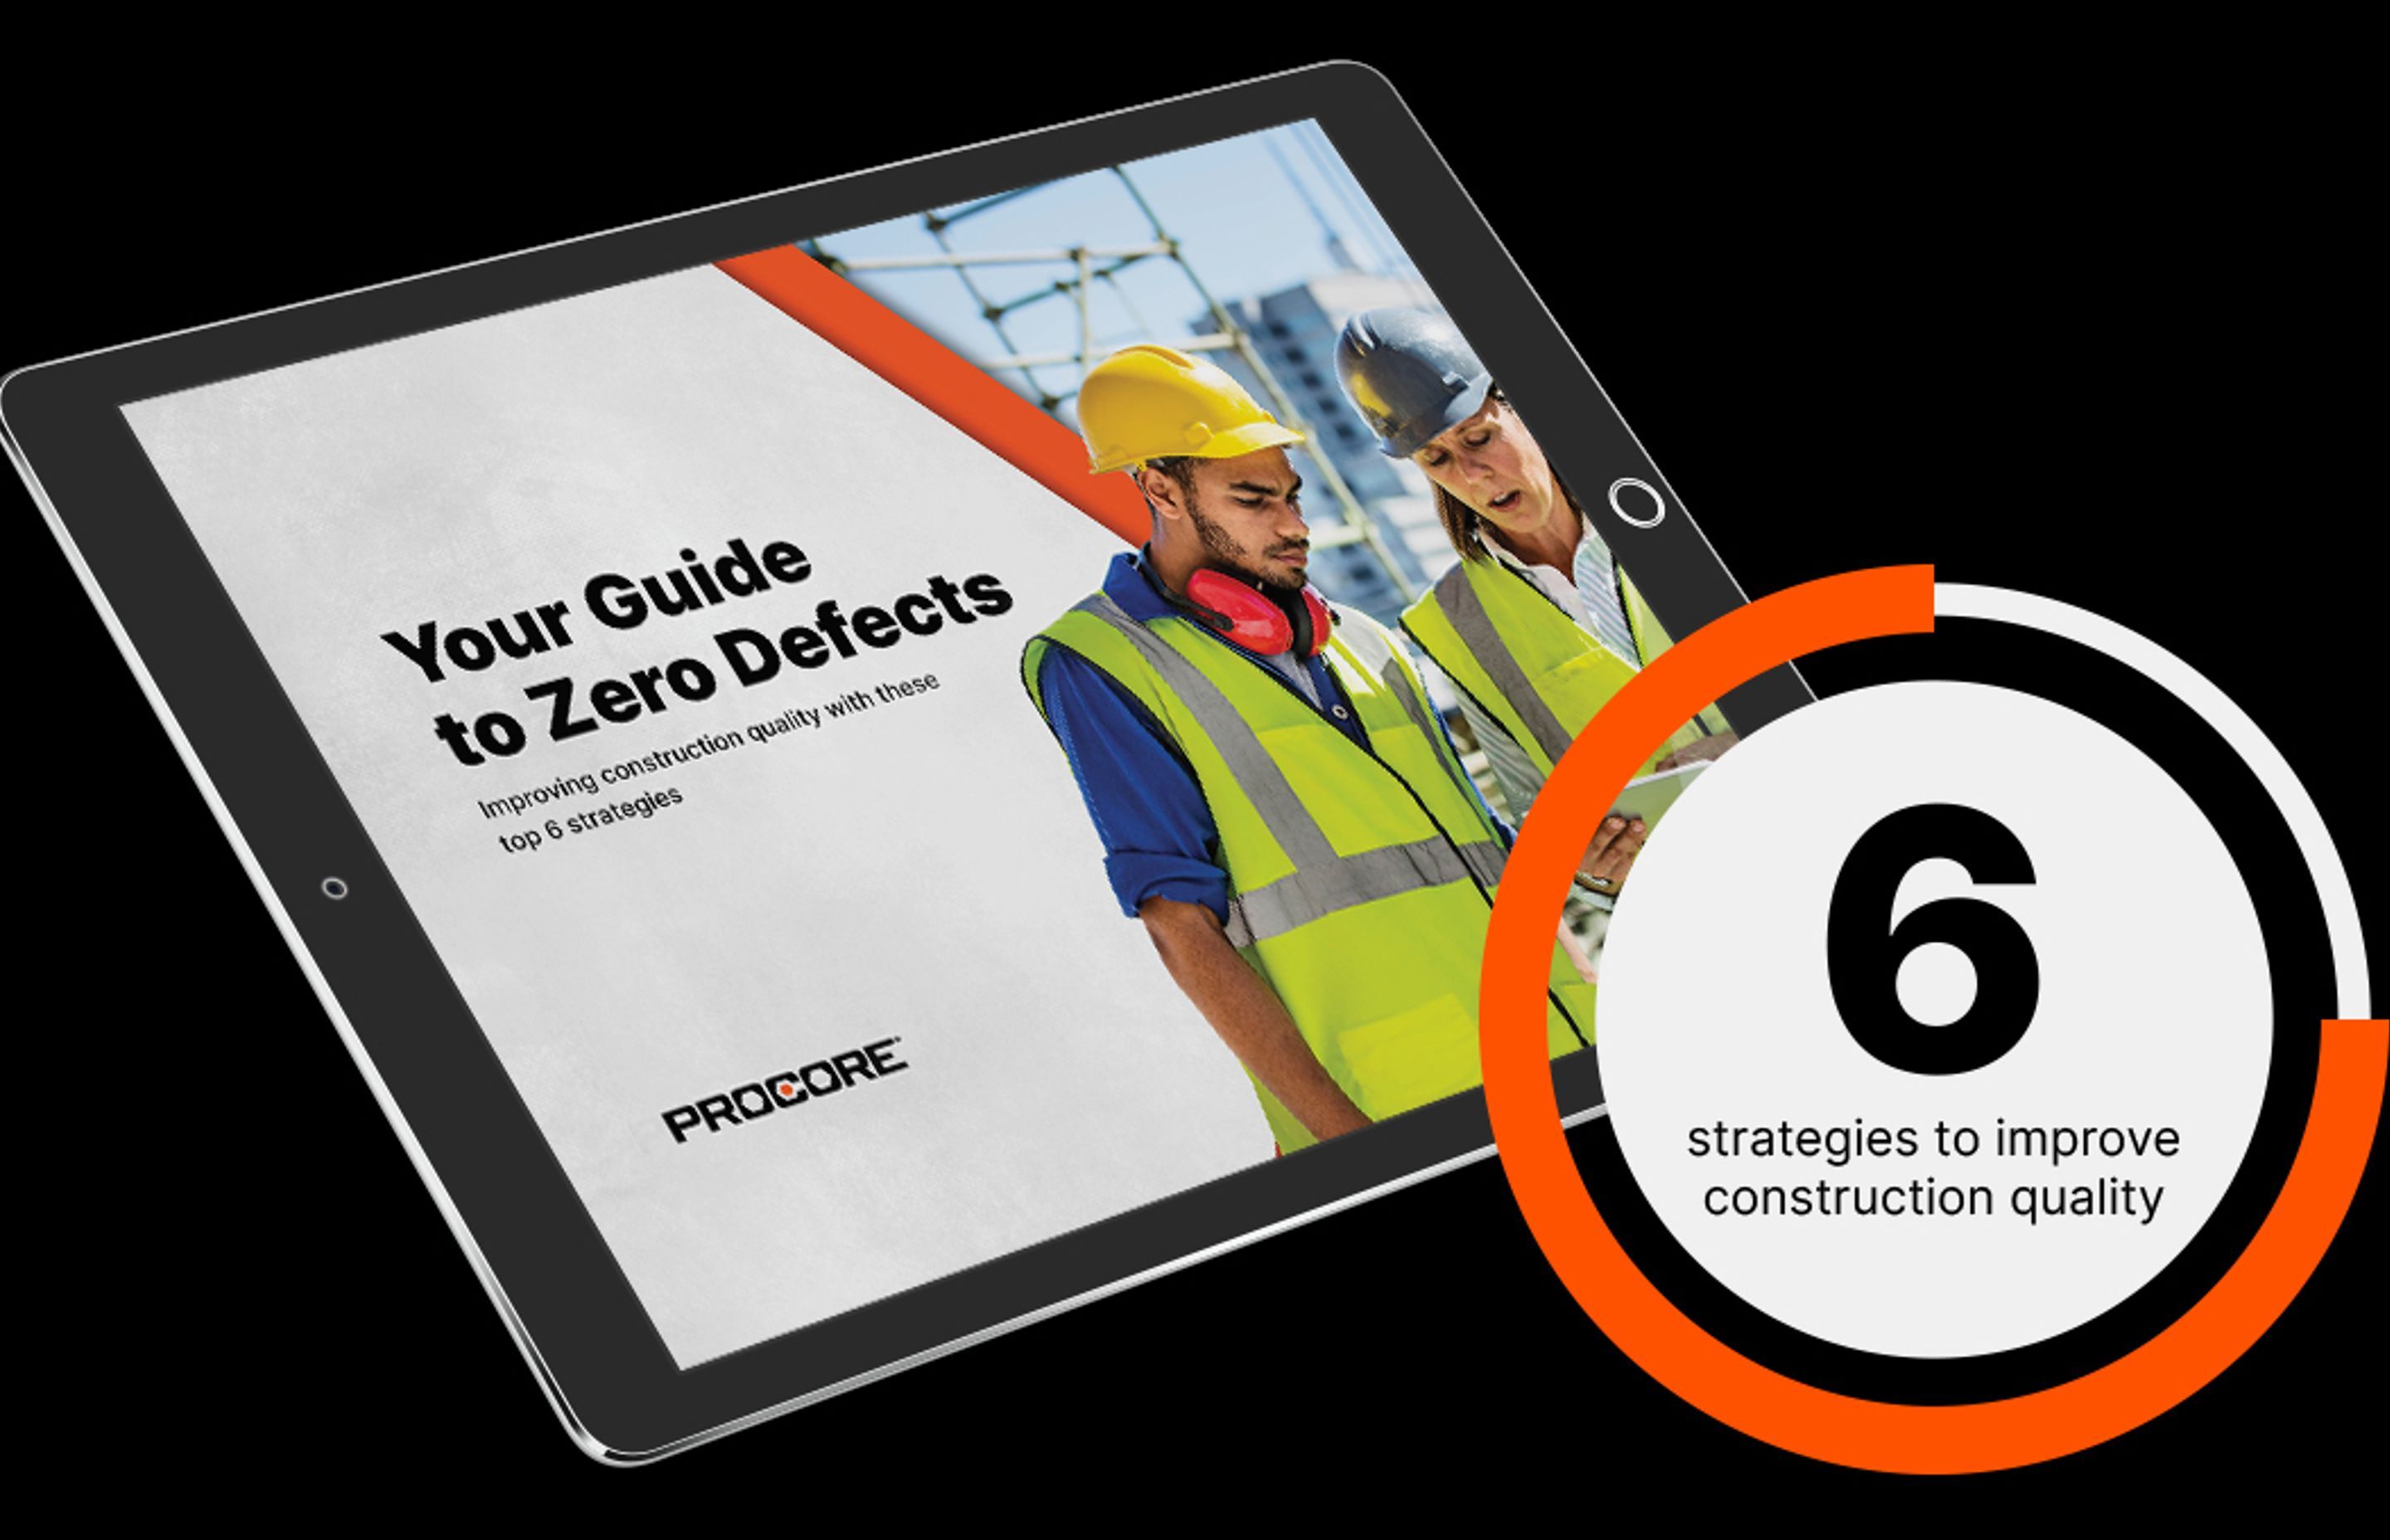 The Procore 'Your Guide to Zero Defects' ebook sets out the top six strategies for eliminating costly rework defects.